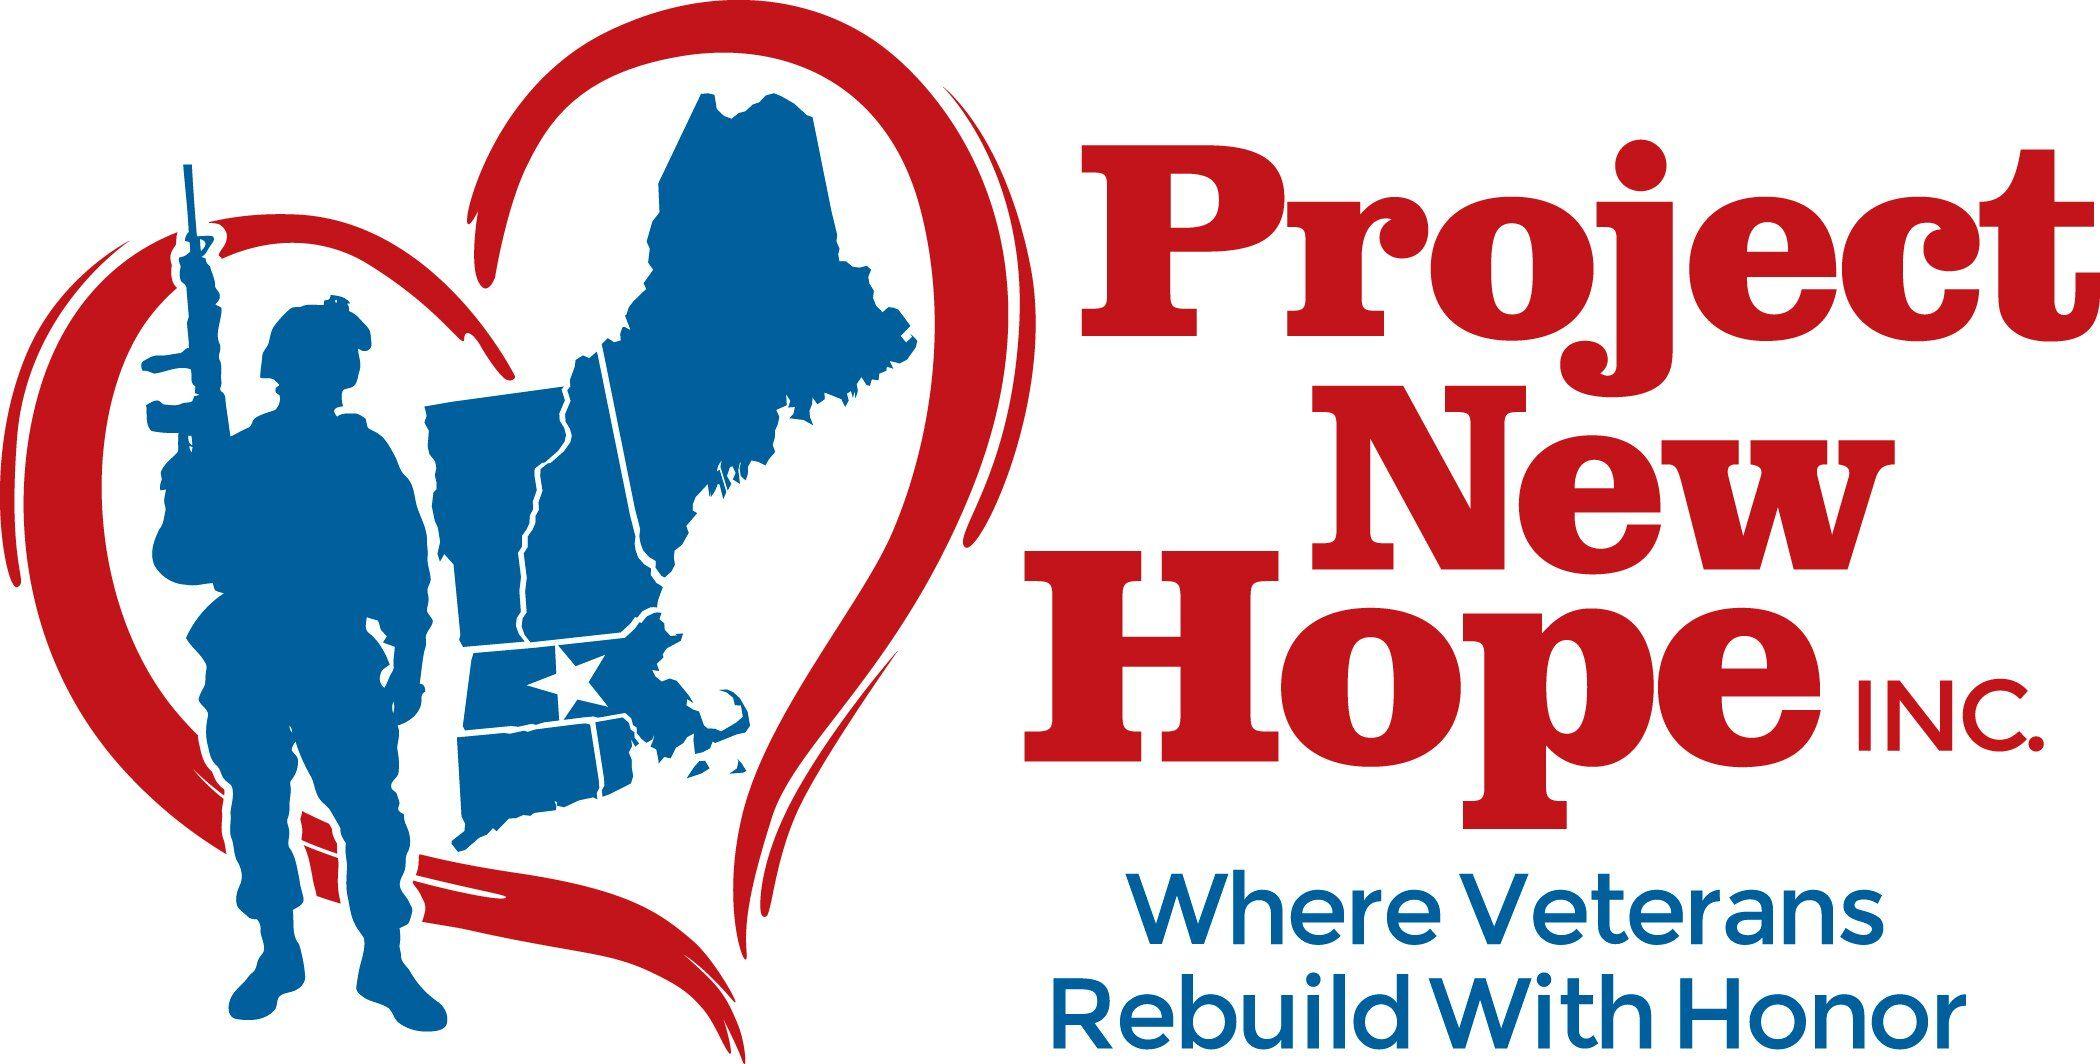 New Hope Logo - Project New Hope logo Westfield News